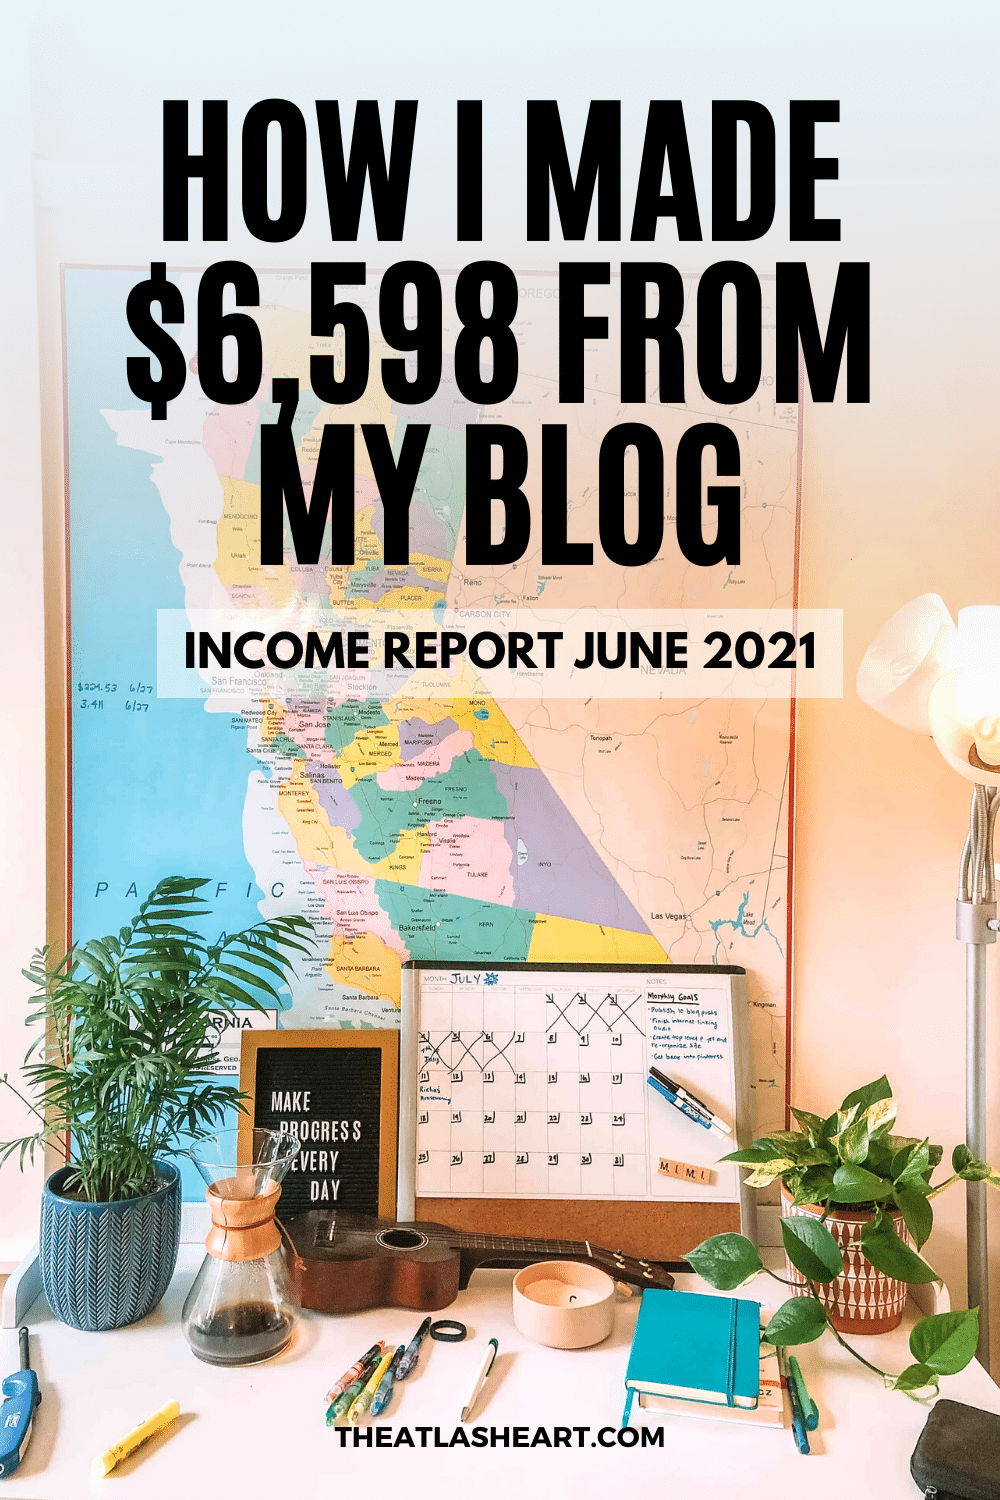 How I Made $6,598 From My Blog in June 2021